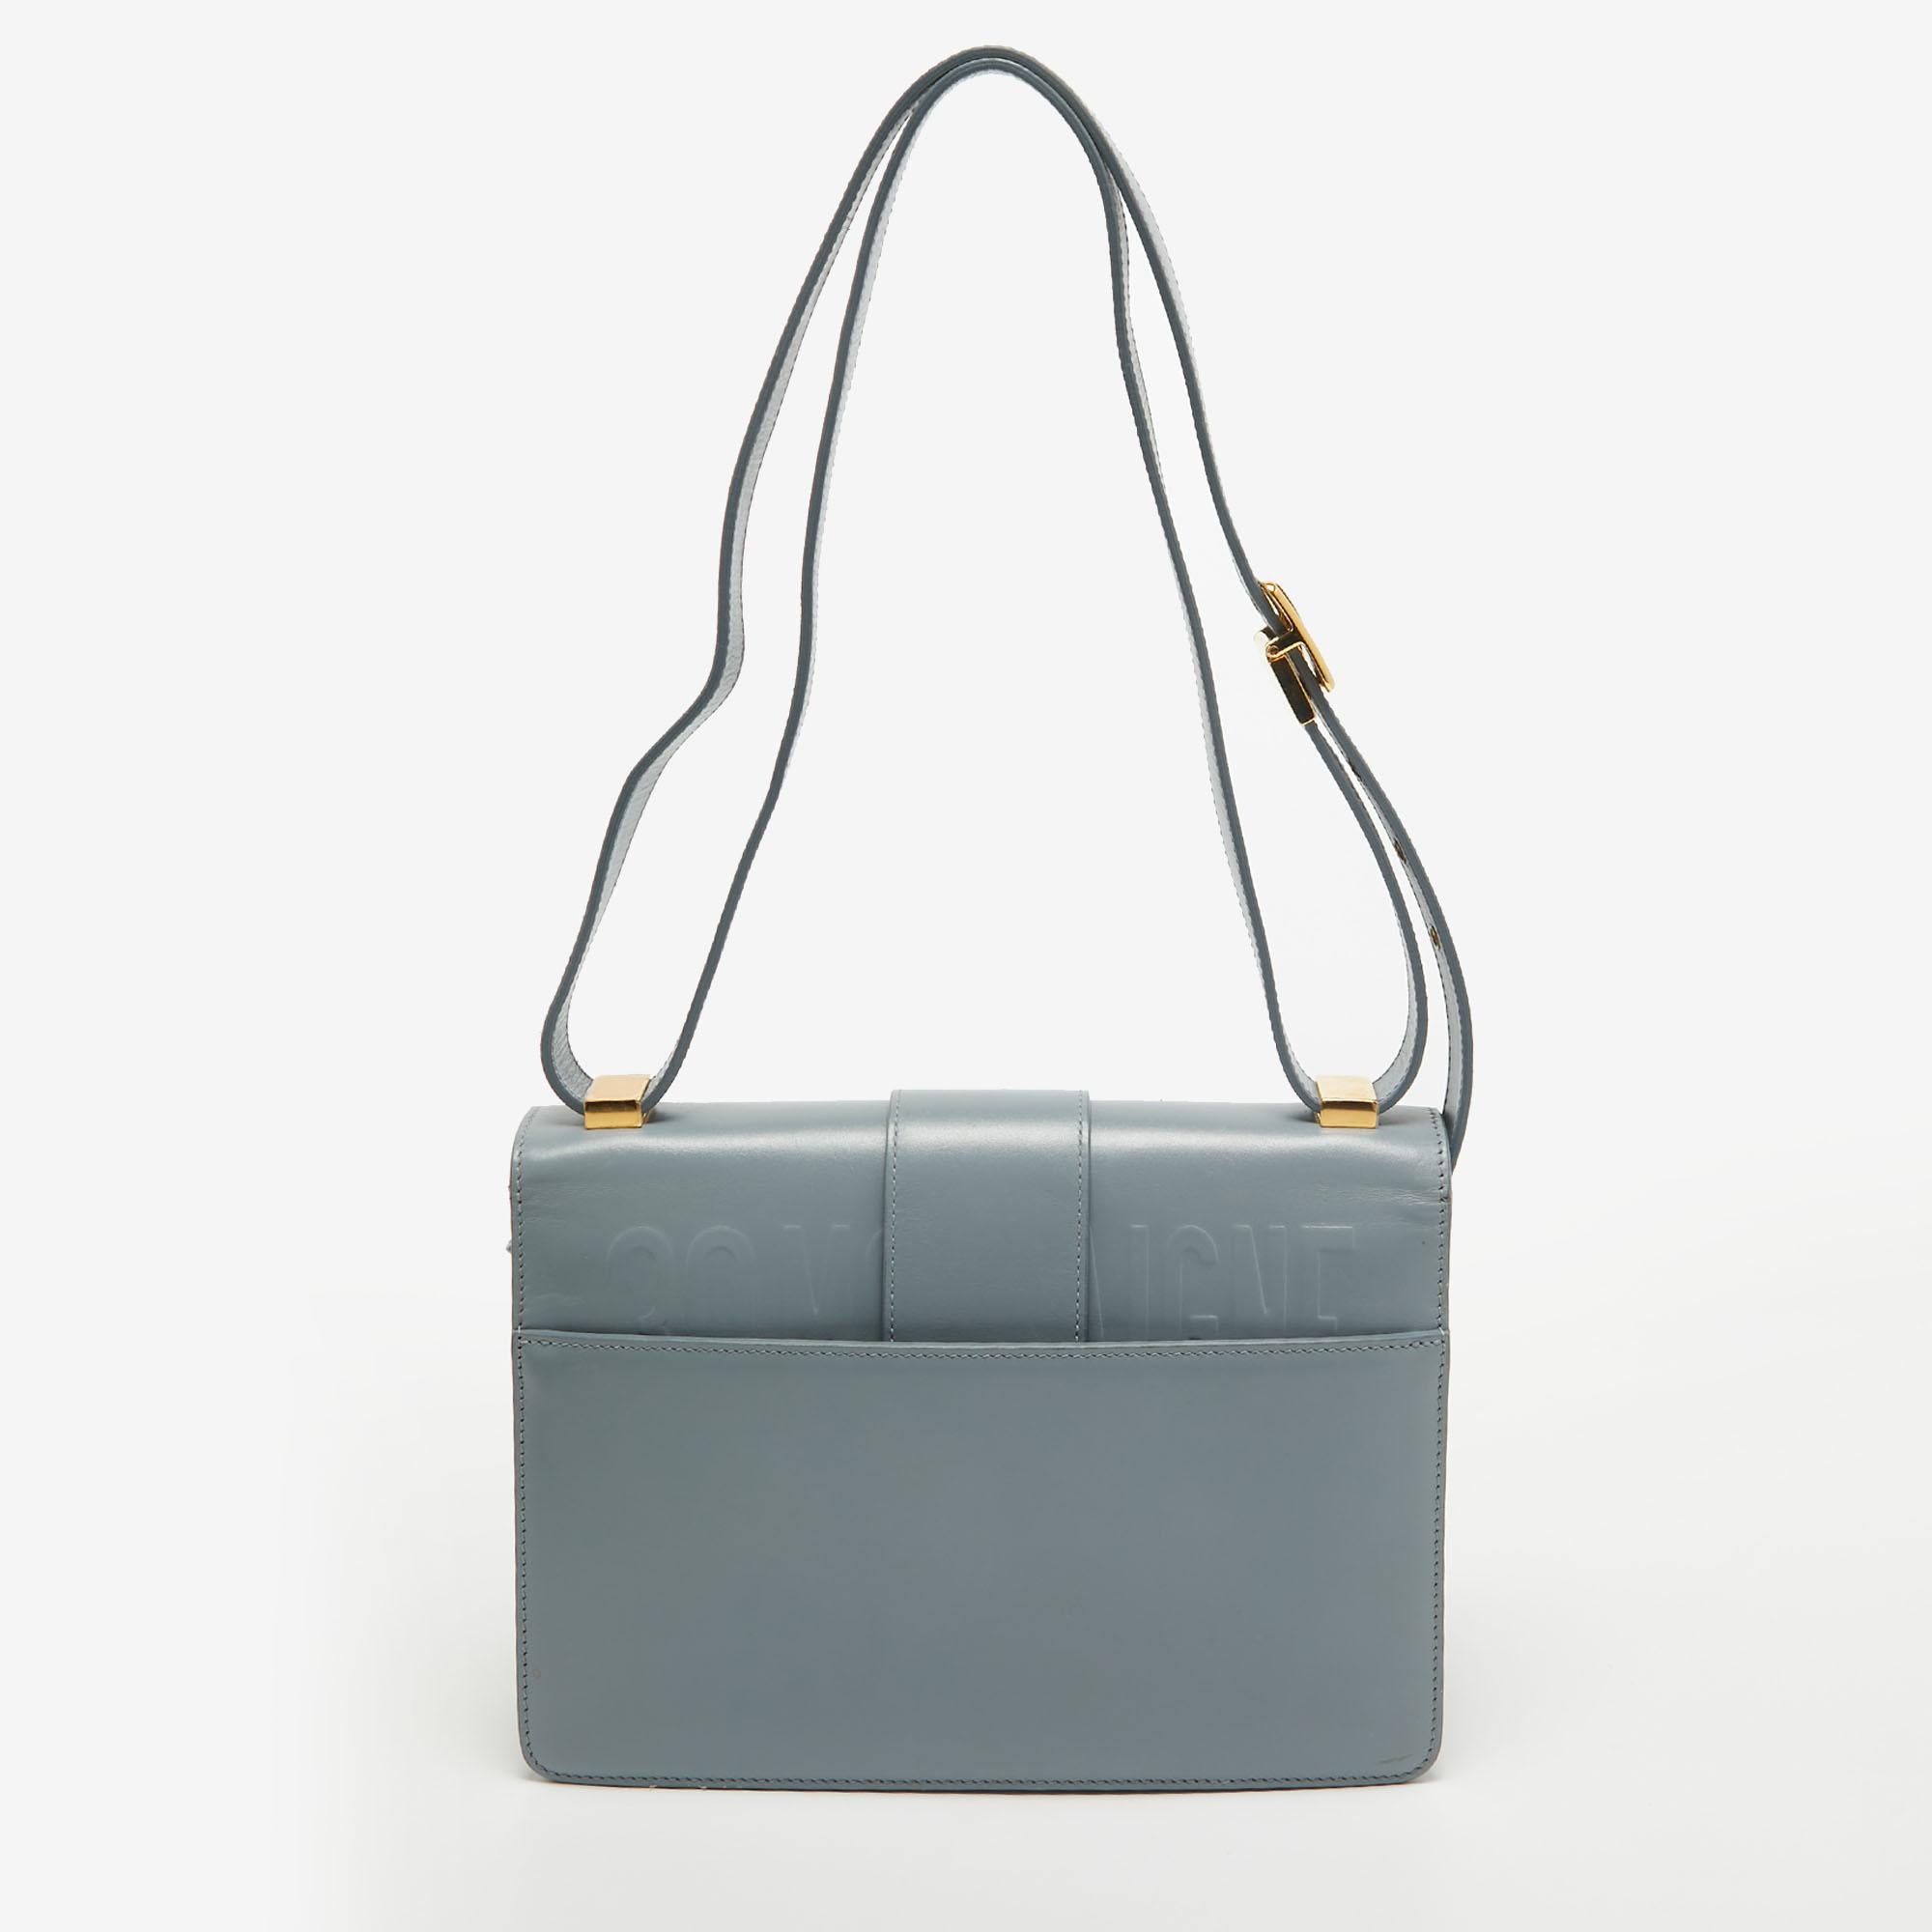 One of the most emblematic creations of the House of Dior is this gorgeous 30 Montaigne shoulder bag. Embellished with the signature CD accent on the front and crafted using pale blue leather, this bag provides us with a neat leather interior and a